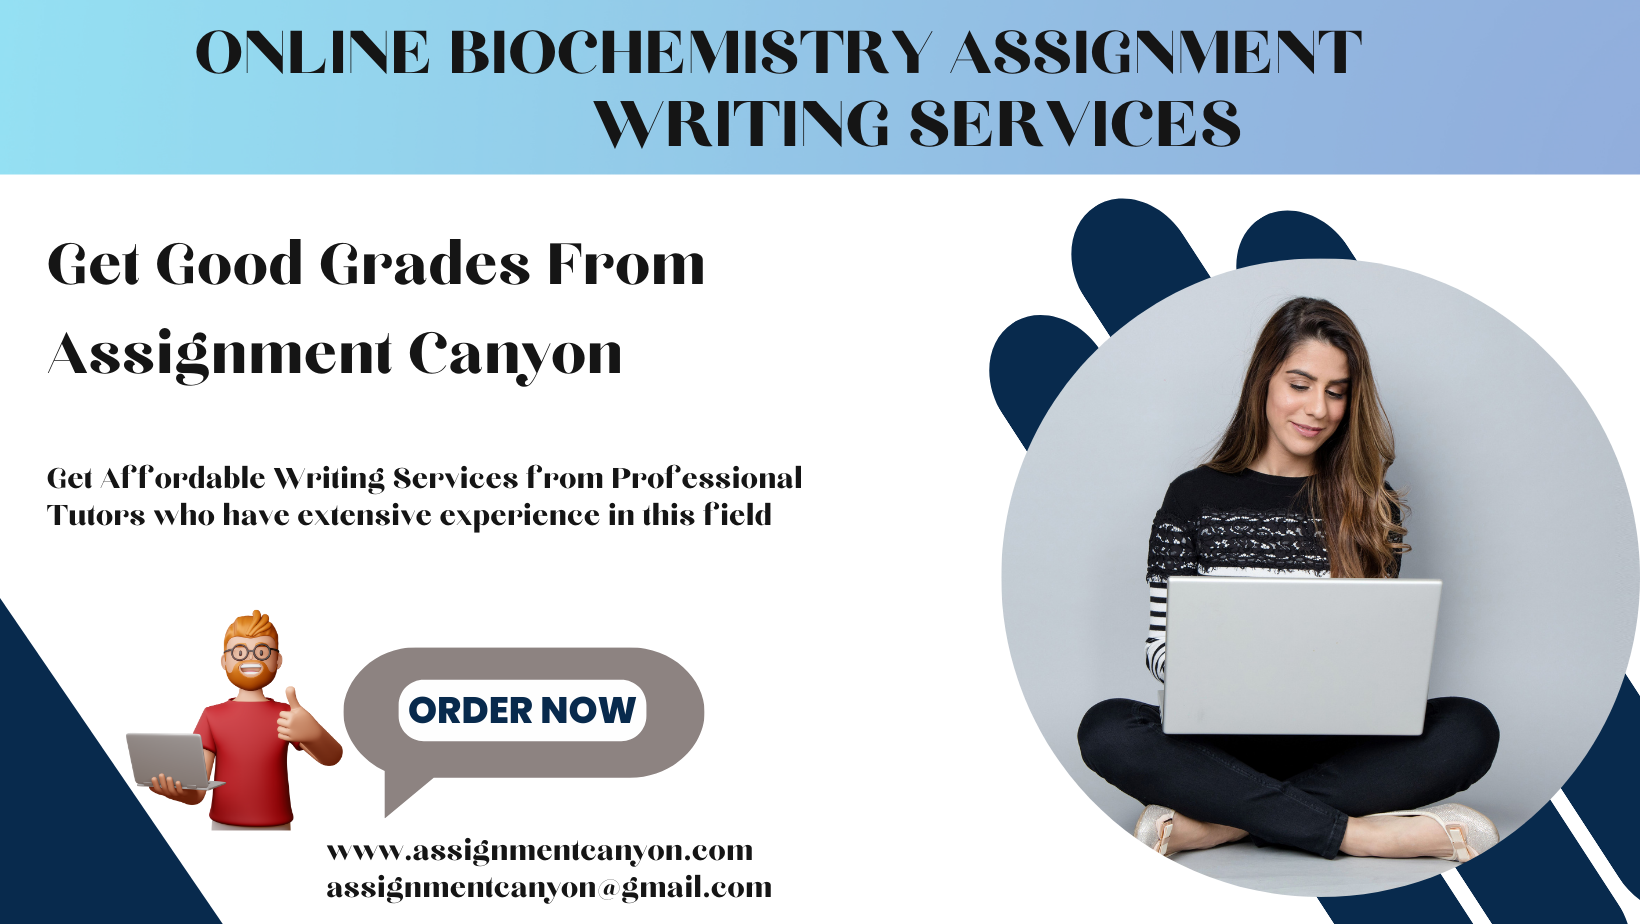 Assignment Canyon offers online biochemistry assignment writing services at reasonable rates for all academic levels